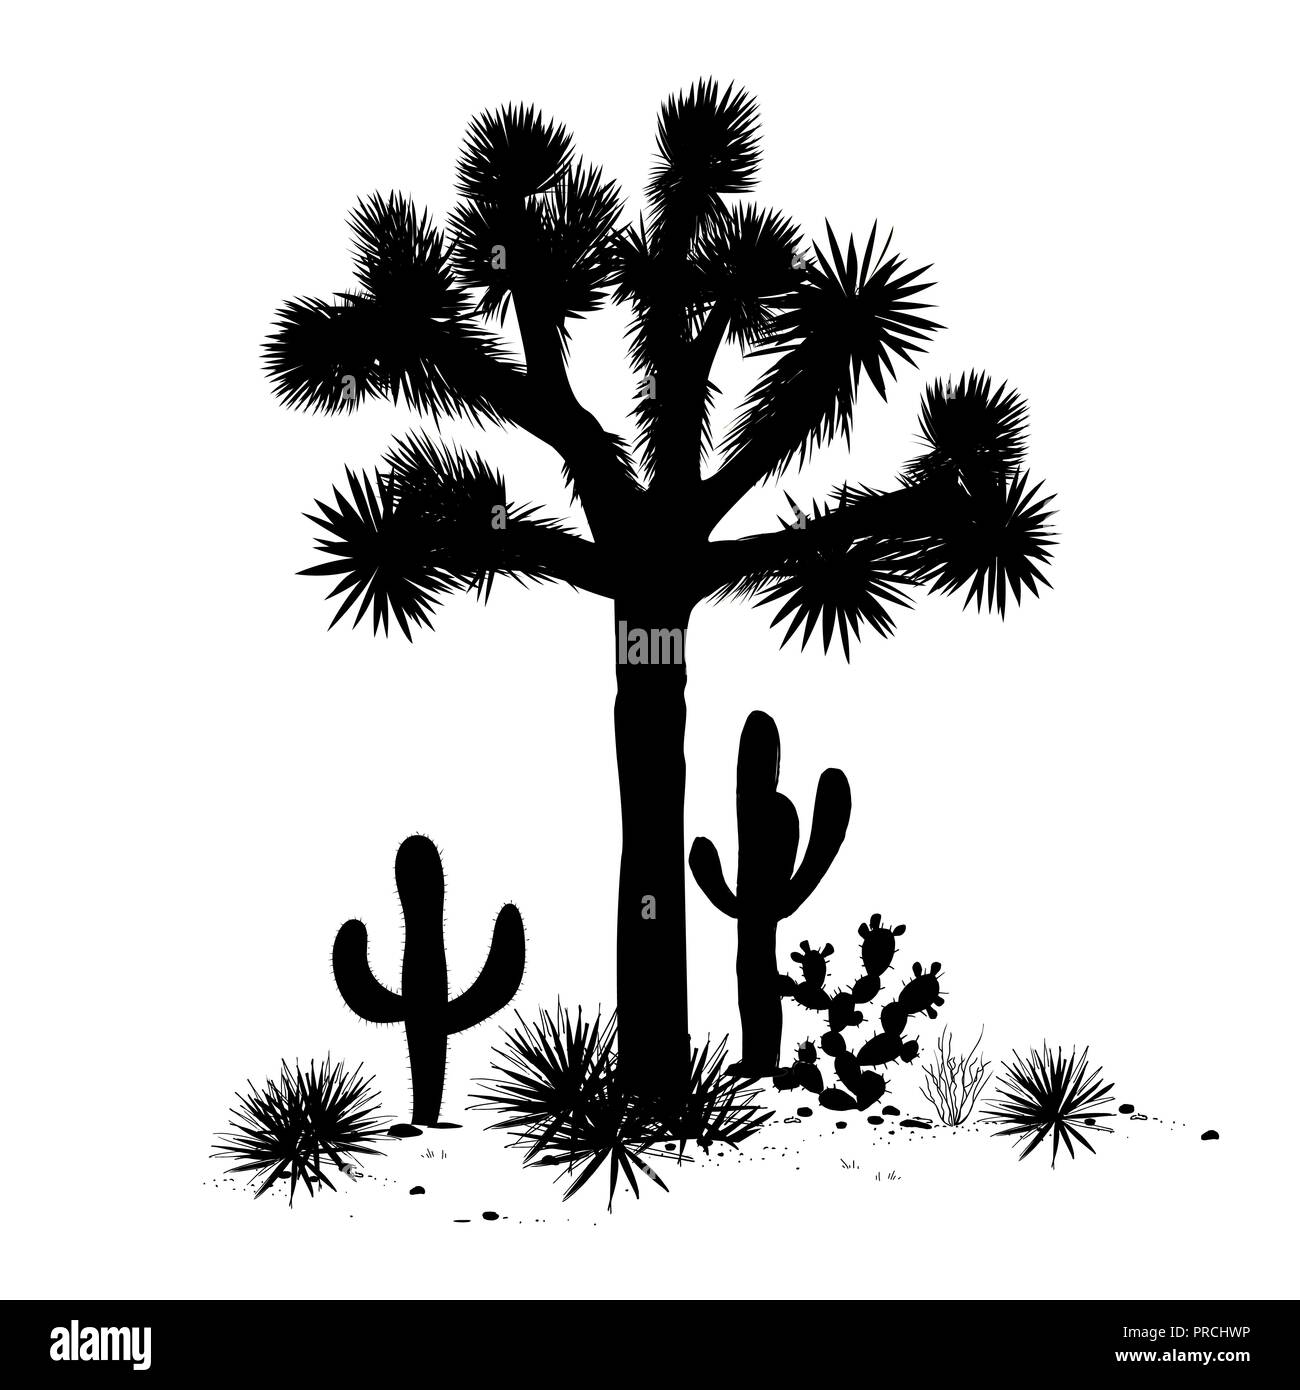 Outline landscape with Joshua tree, agaves, and prickly pear silhouettes. Vector illustration. Stock Vector